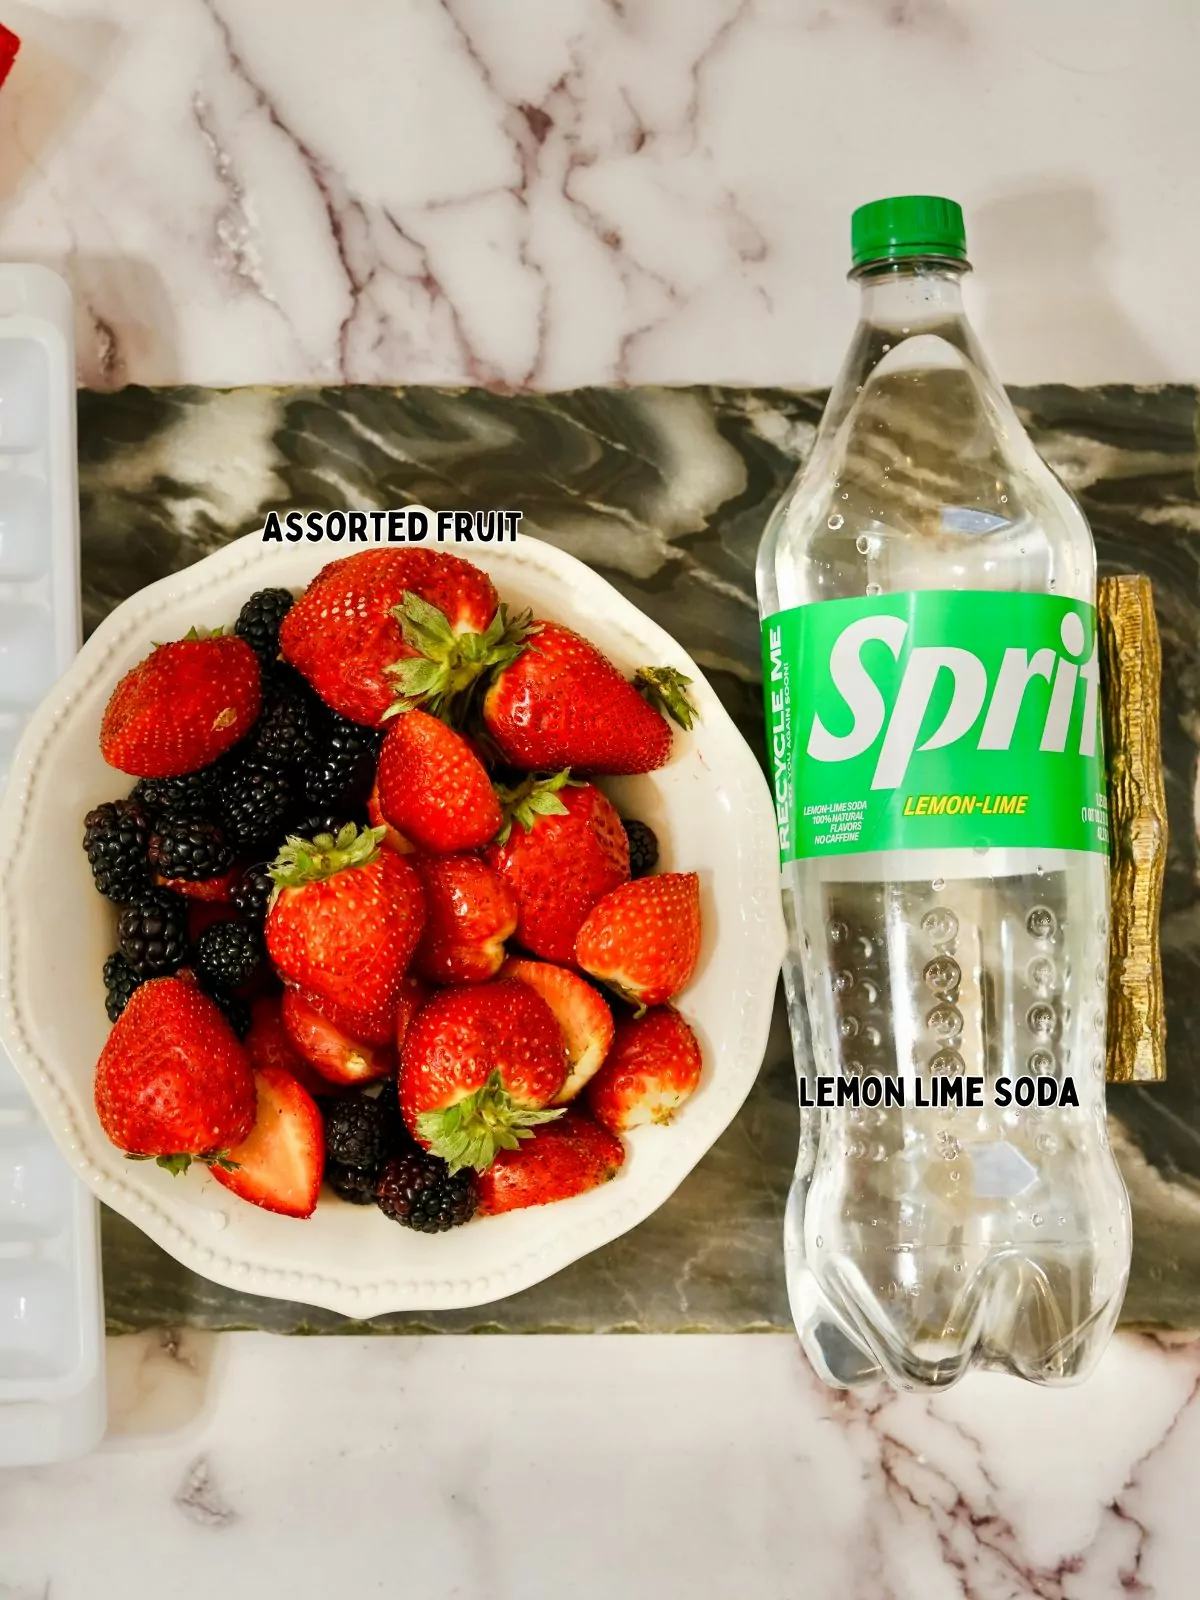 bowl of strawberries and blackberries and a bottle of lemon lime soda.